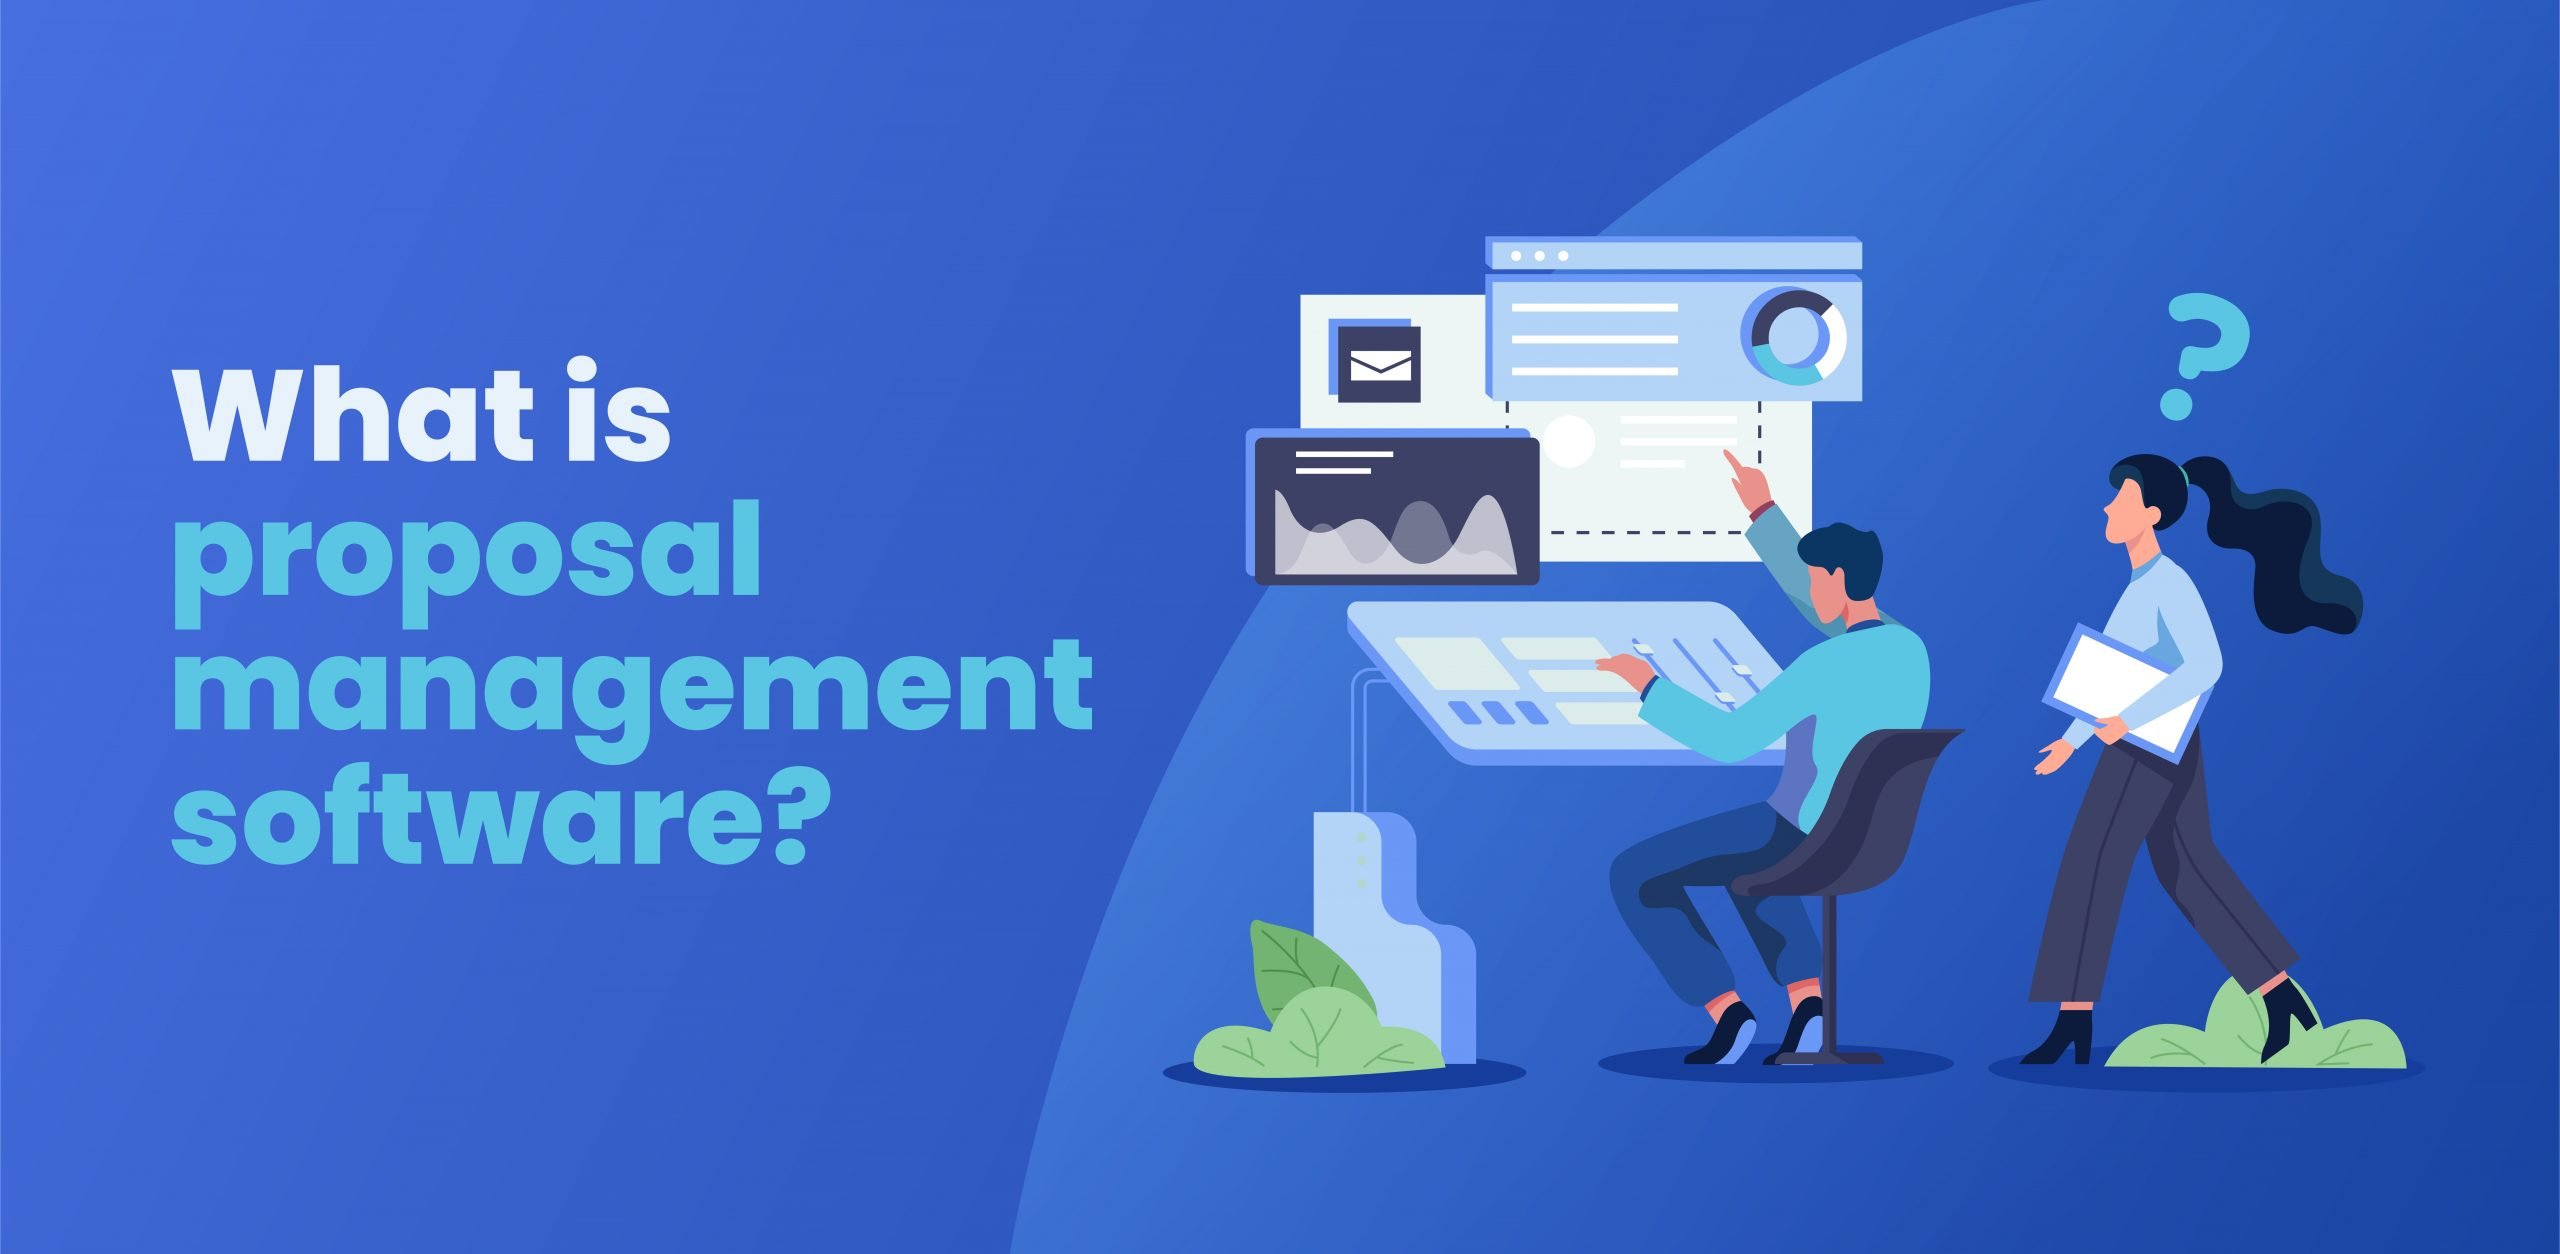 What is proposal management software?